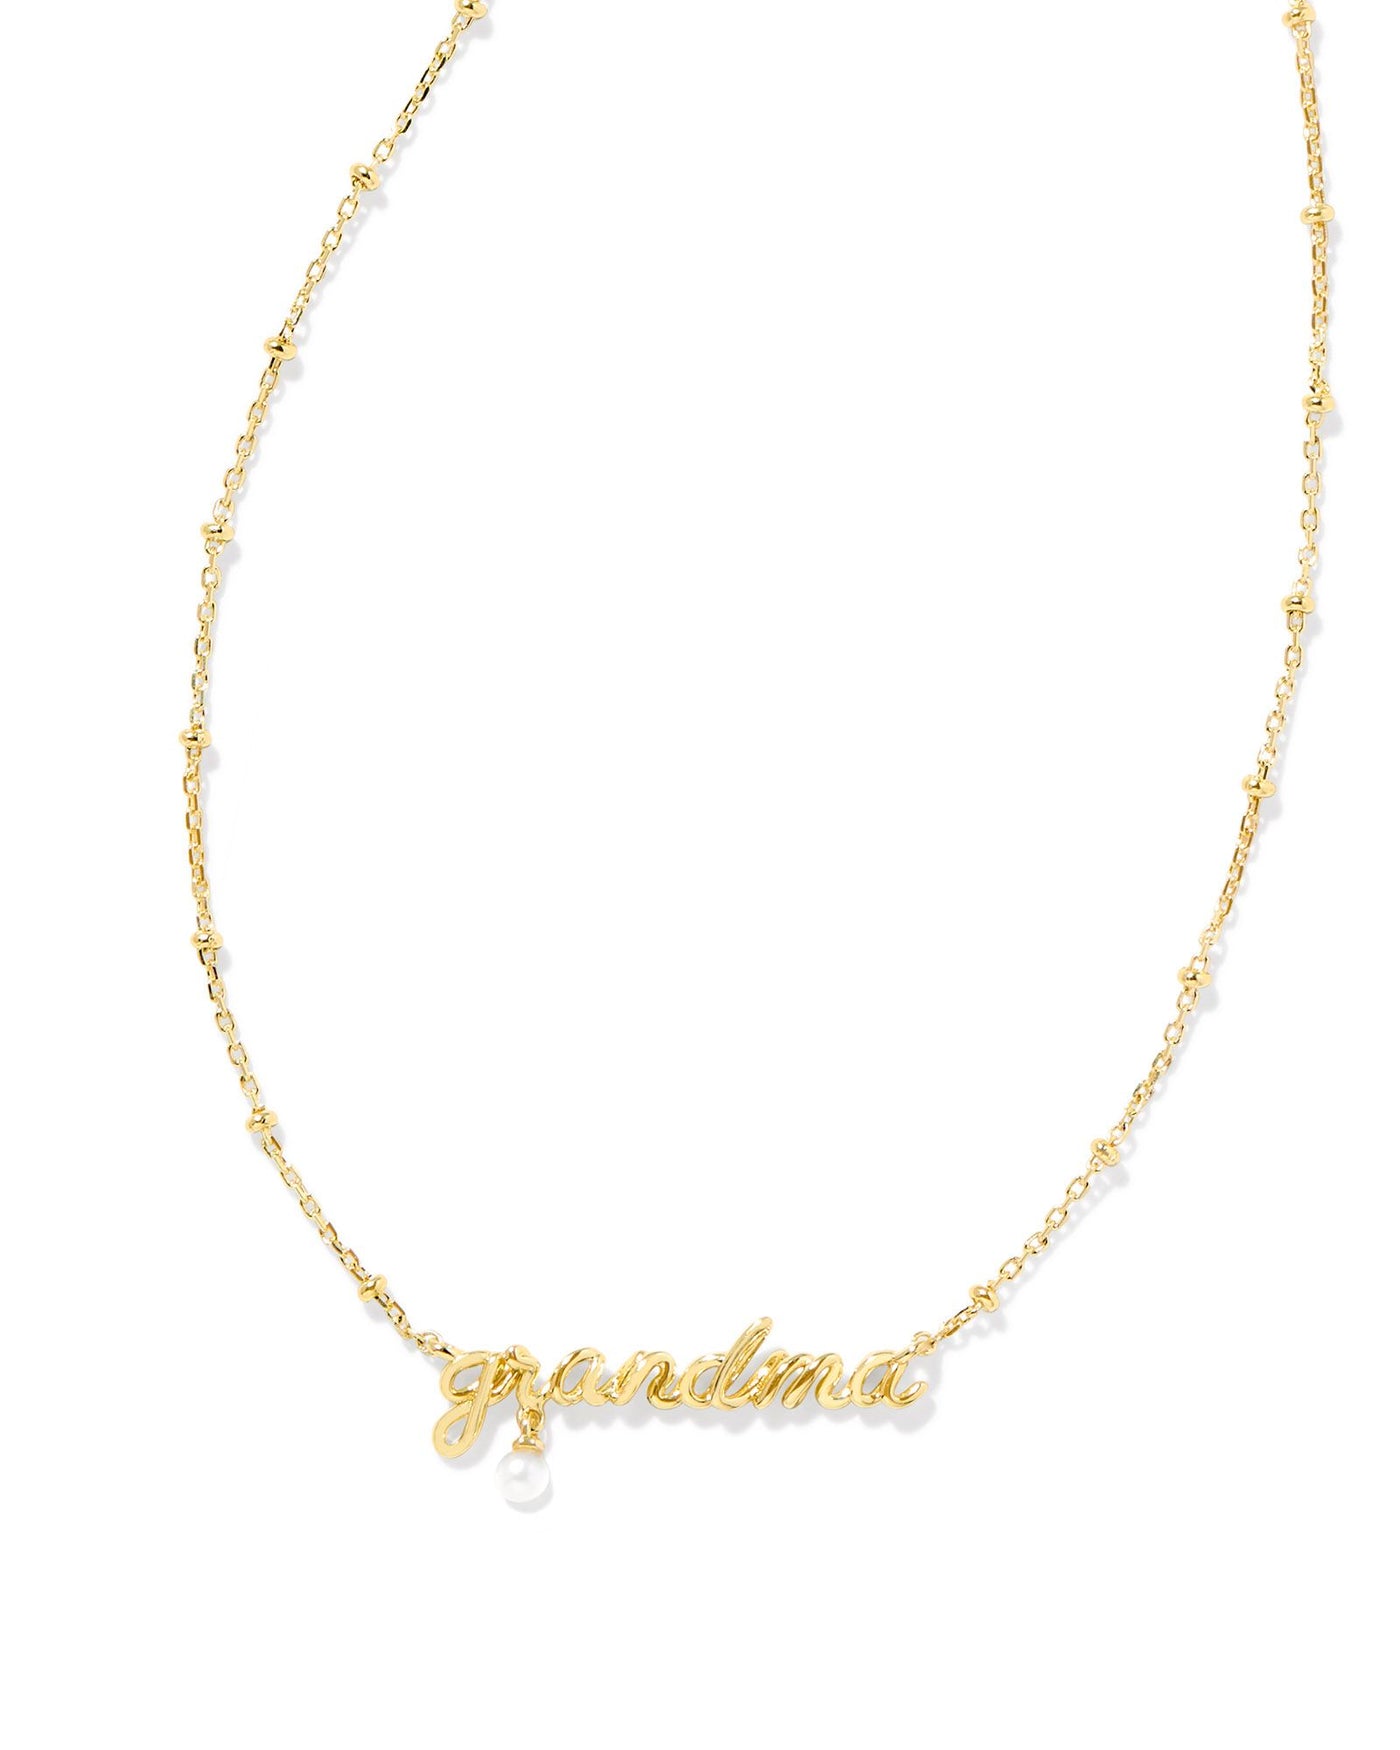 Kendra Scott Grandma Script Necklace-Necklaces-Kendra Scott-Market Street Nest, Fashionable Clothing, Shoes and Home Décor Located in Mabank, TX